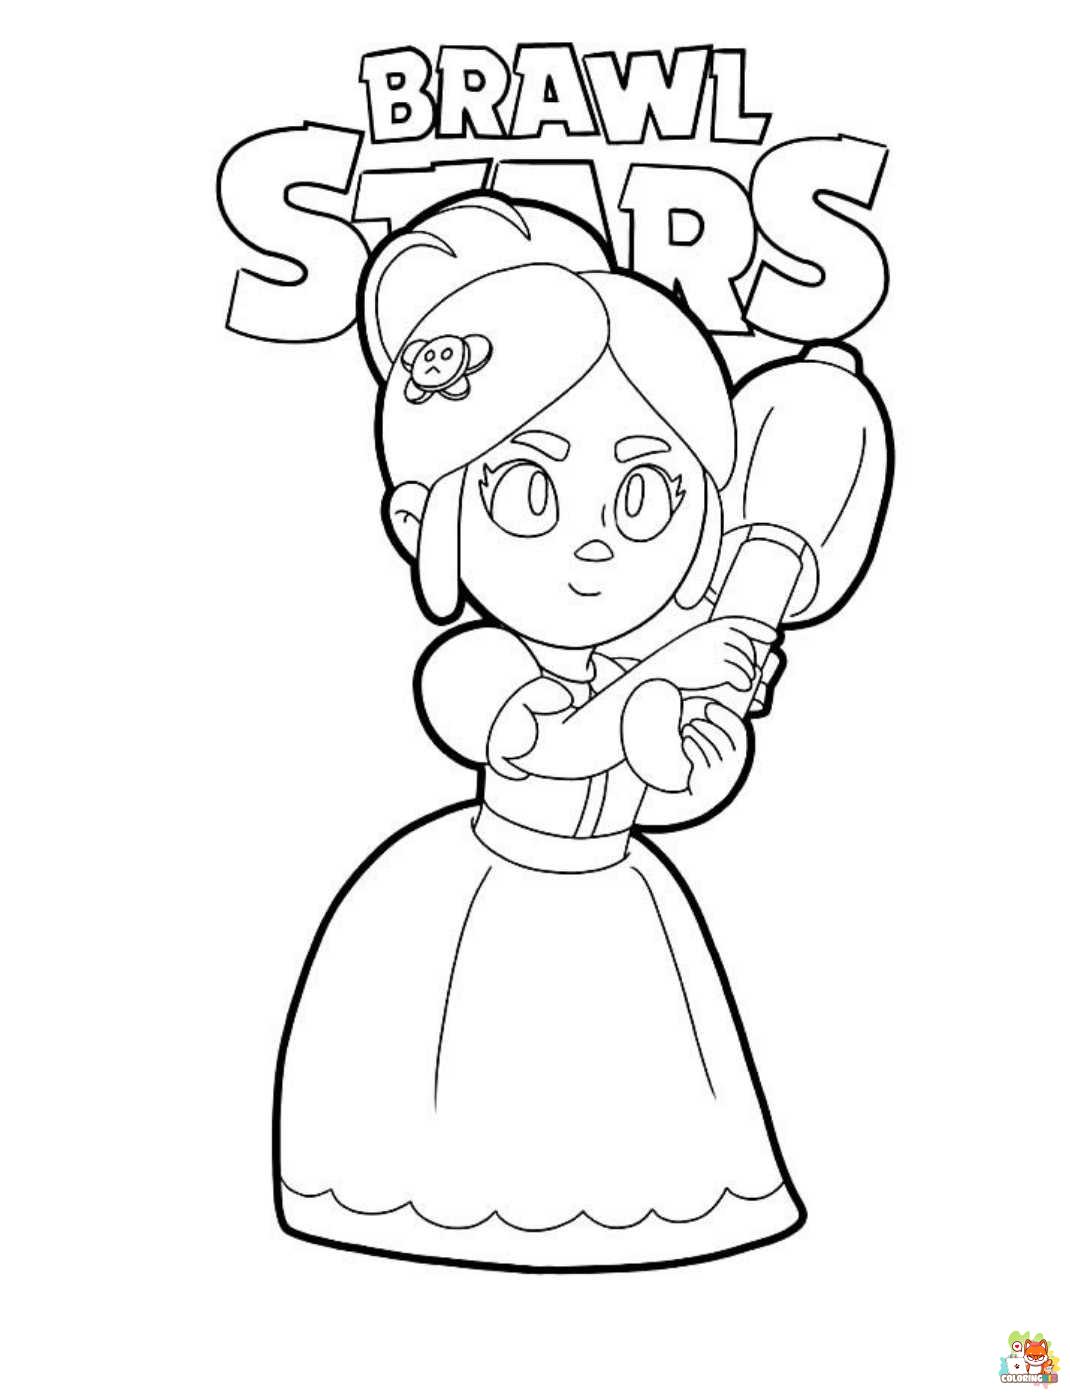 brawl stars coloring pages 1 1